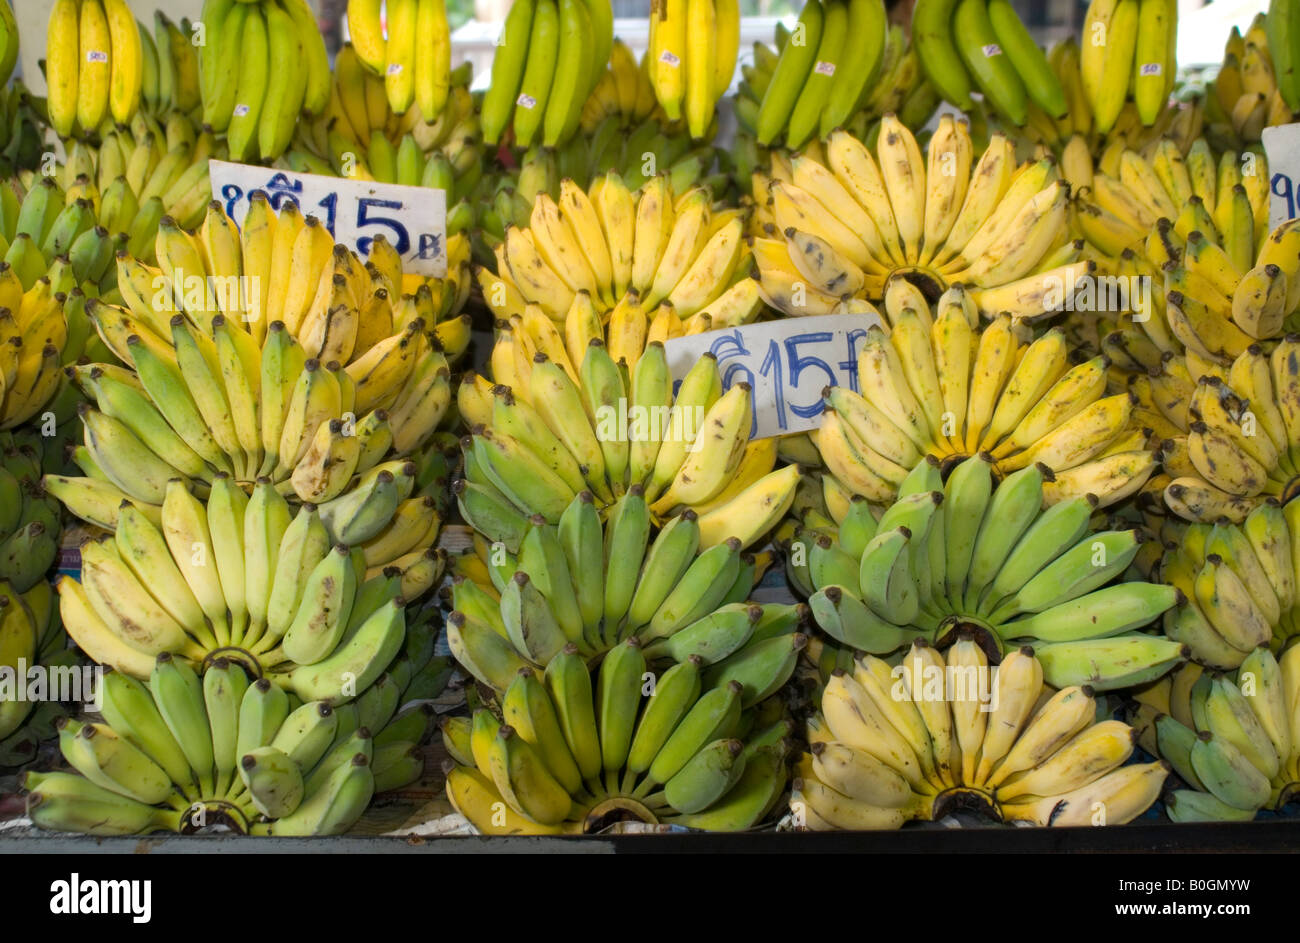 Fresh bananas on display for sale at a local wet market, Thailand. Stock Photo